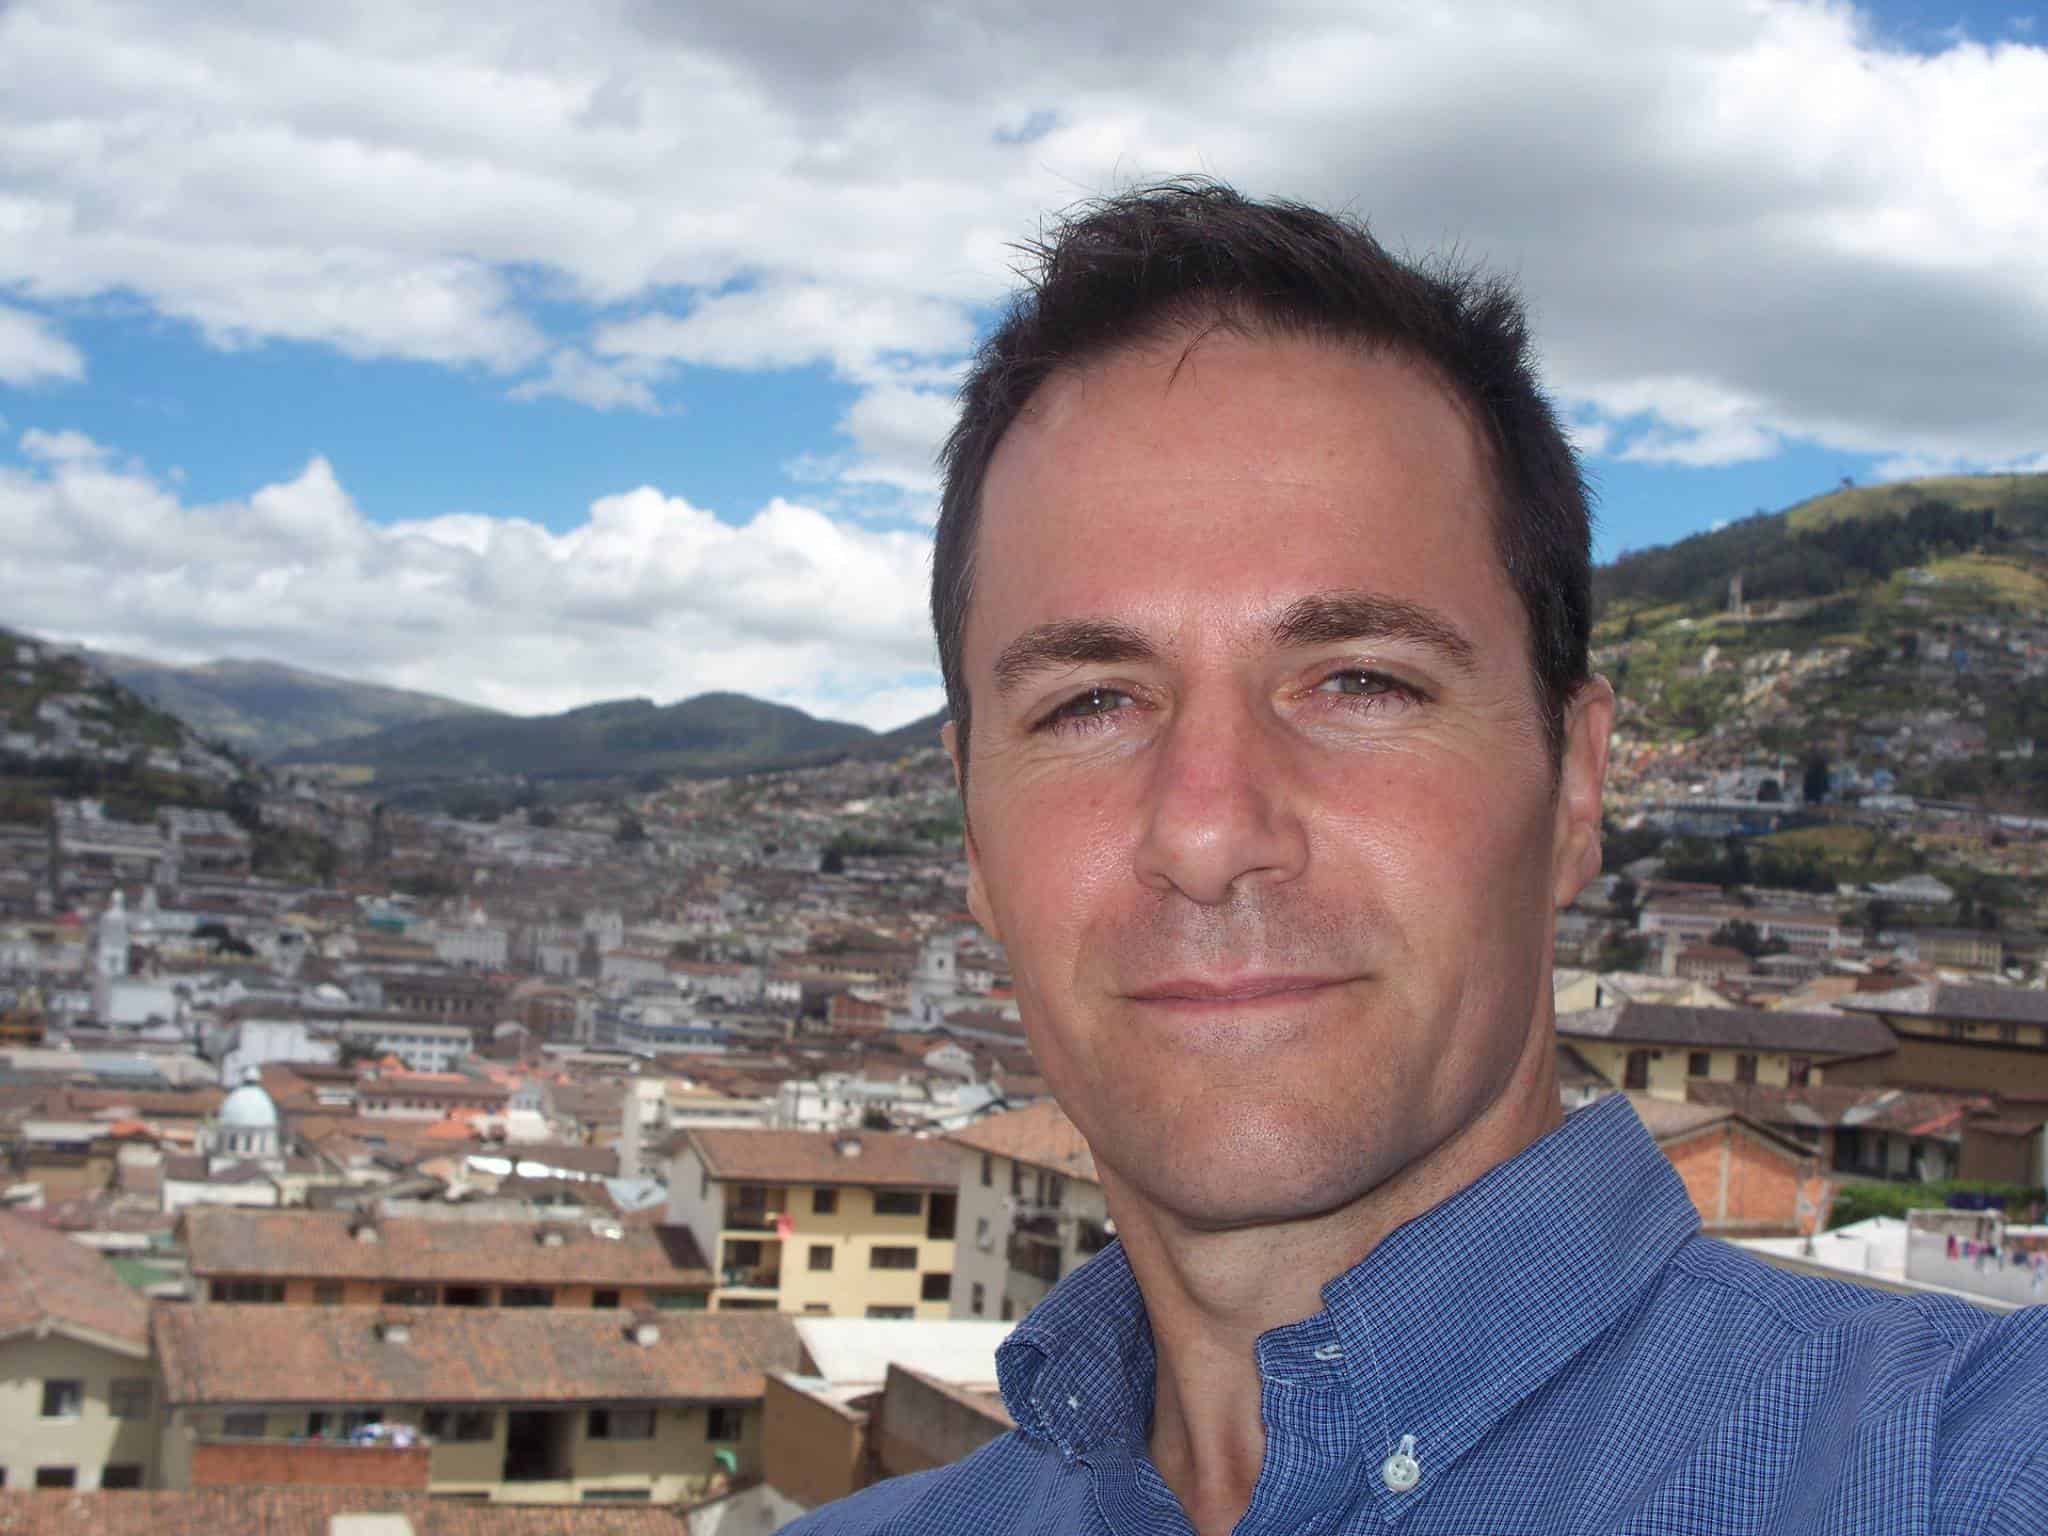 Steve Roller taking a selfie overlooking the city of Quito, Ecuador